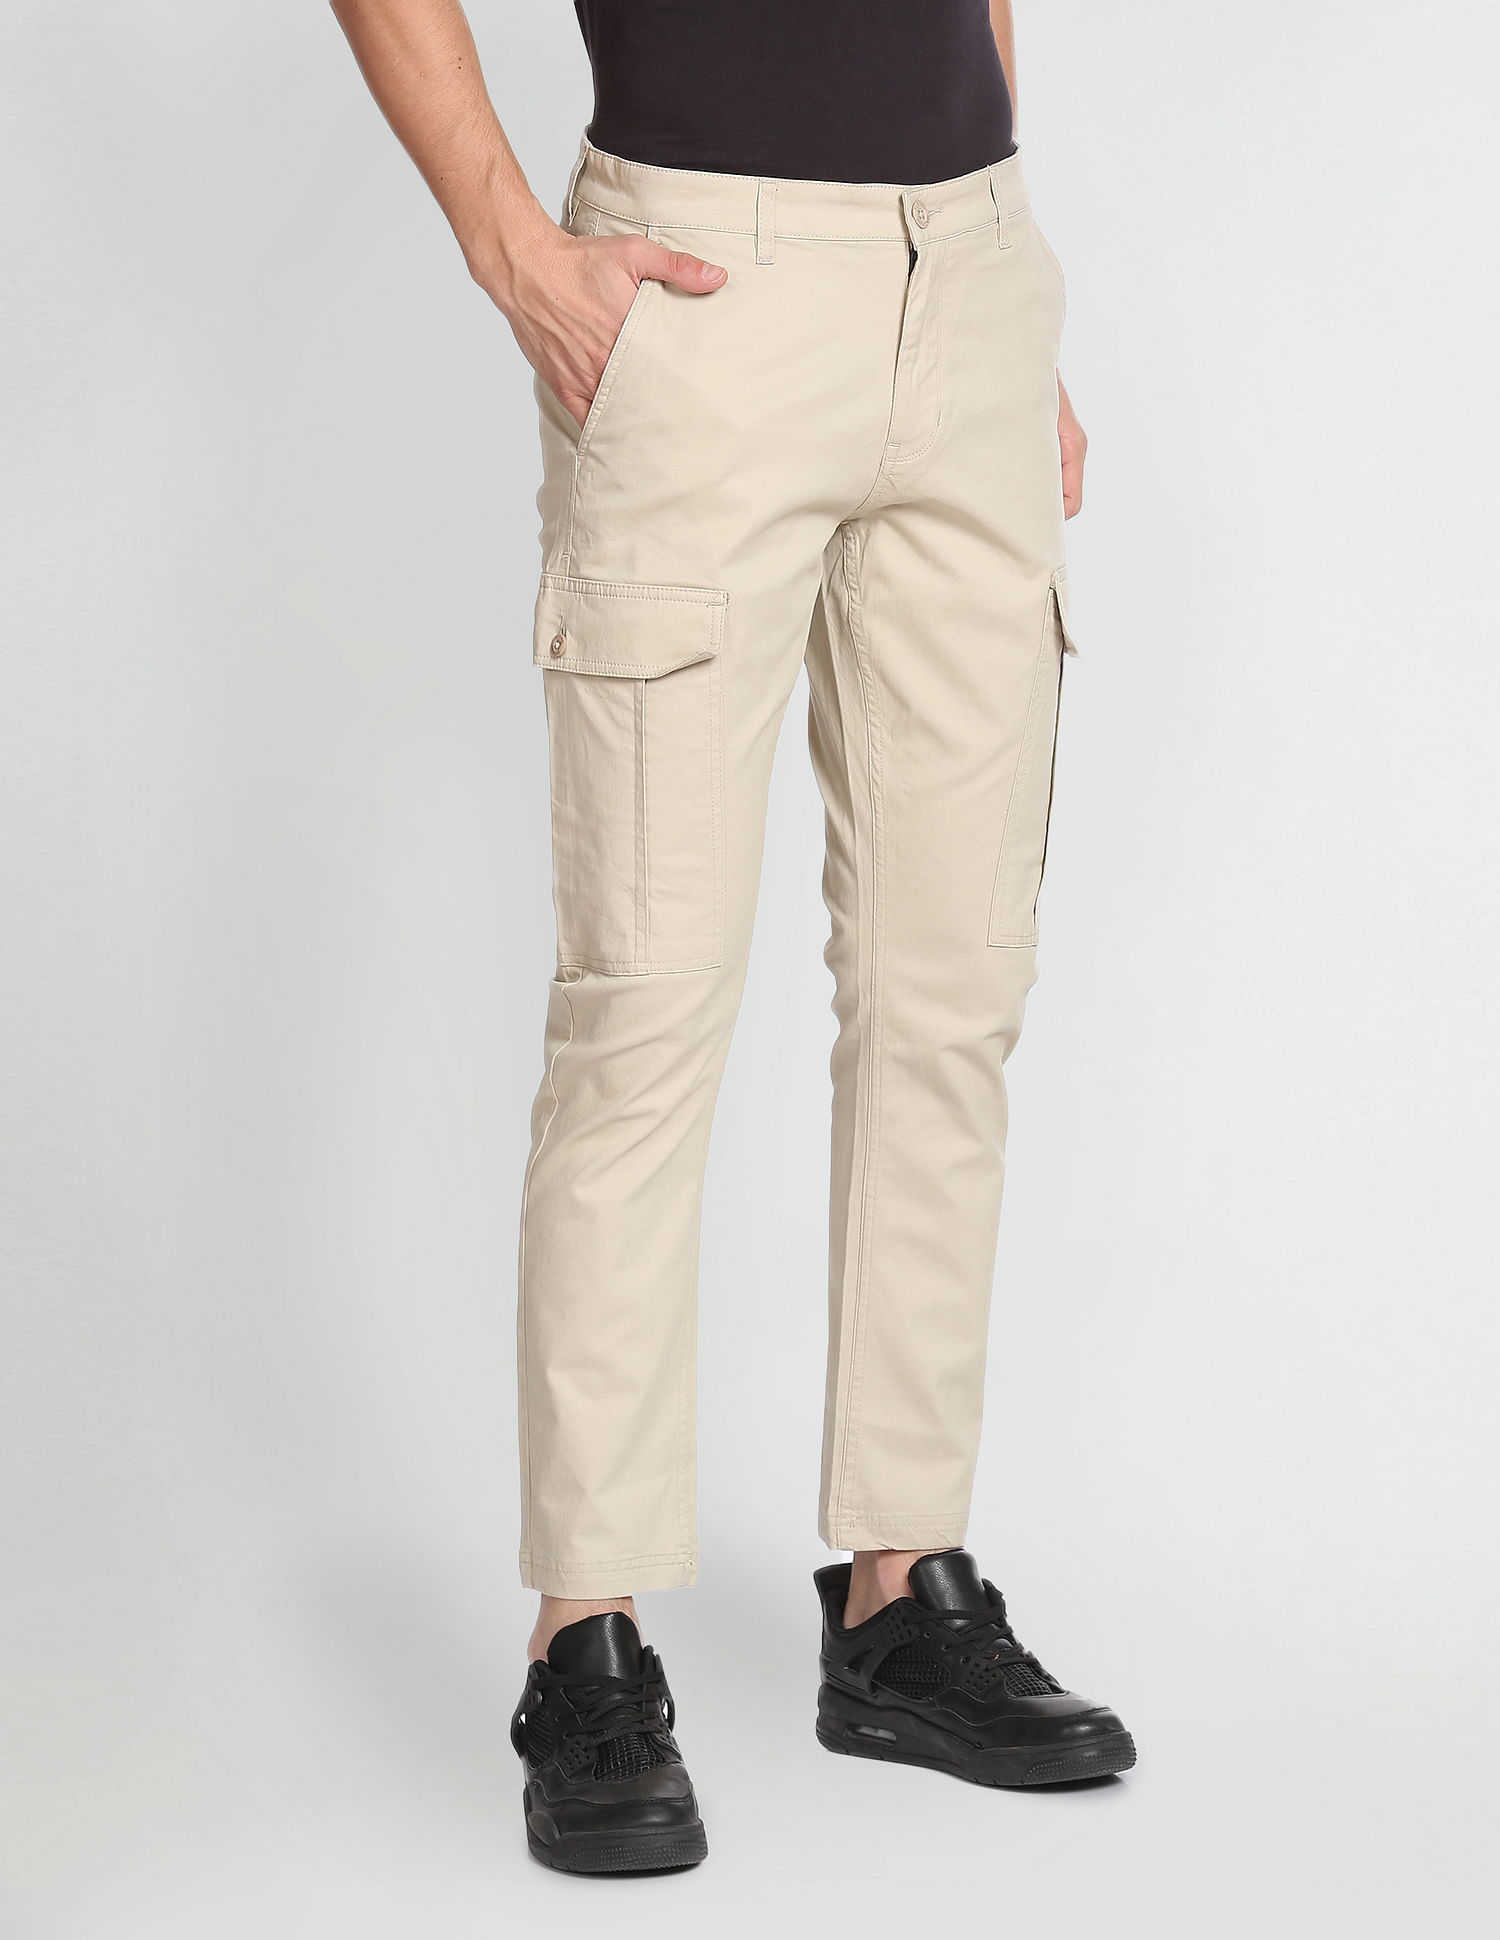 Buy Flying Machine Men's Cargo Casual Trousers (FMTR4211_Khaki_30W x 33L)  at Amazon.in